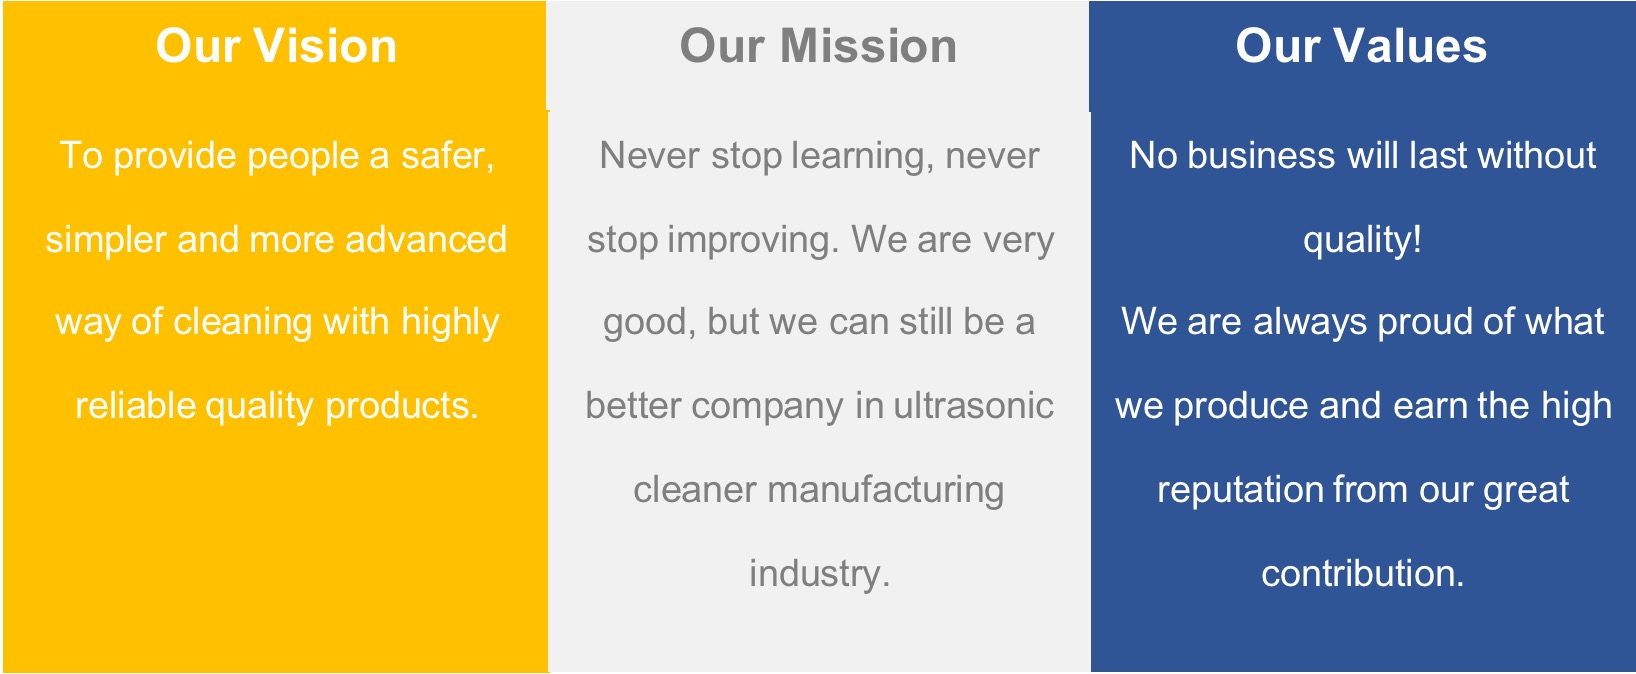 Volksonic_vision_mission_values.jpg